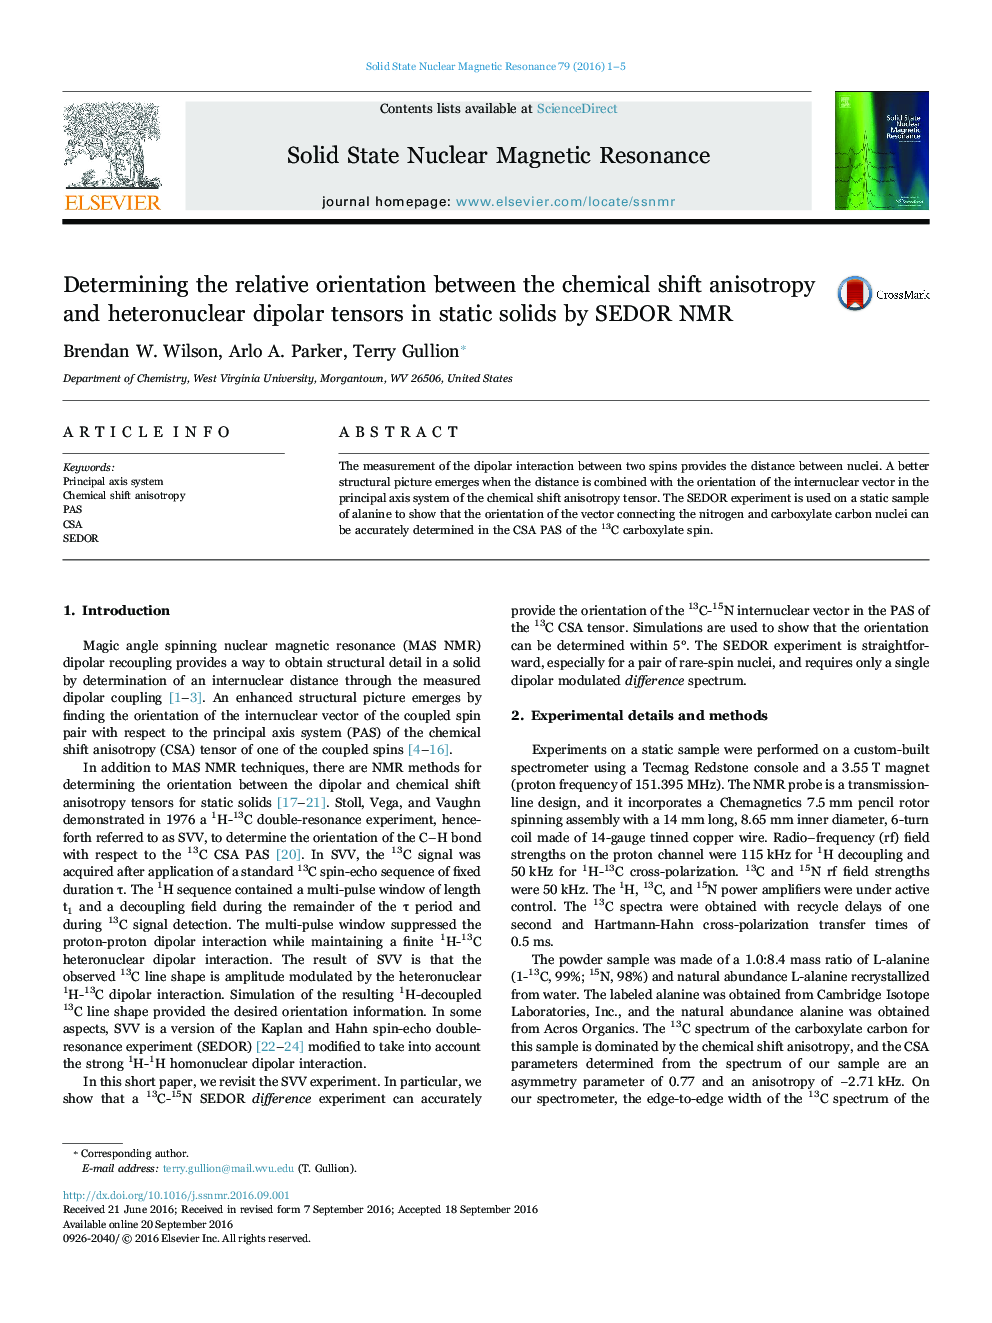 Determining the relative orientation between the chemical shift anisotropy and heteronuclear dipolar tensors in static solids by SEDOR NMR